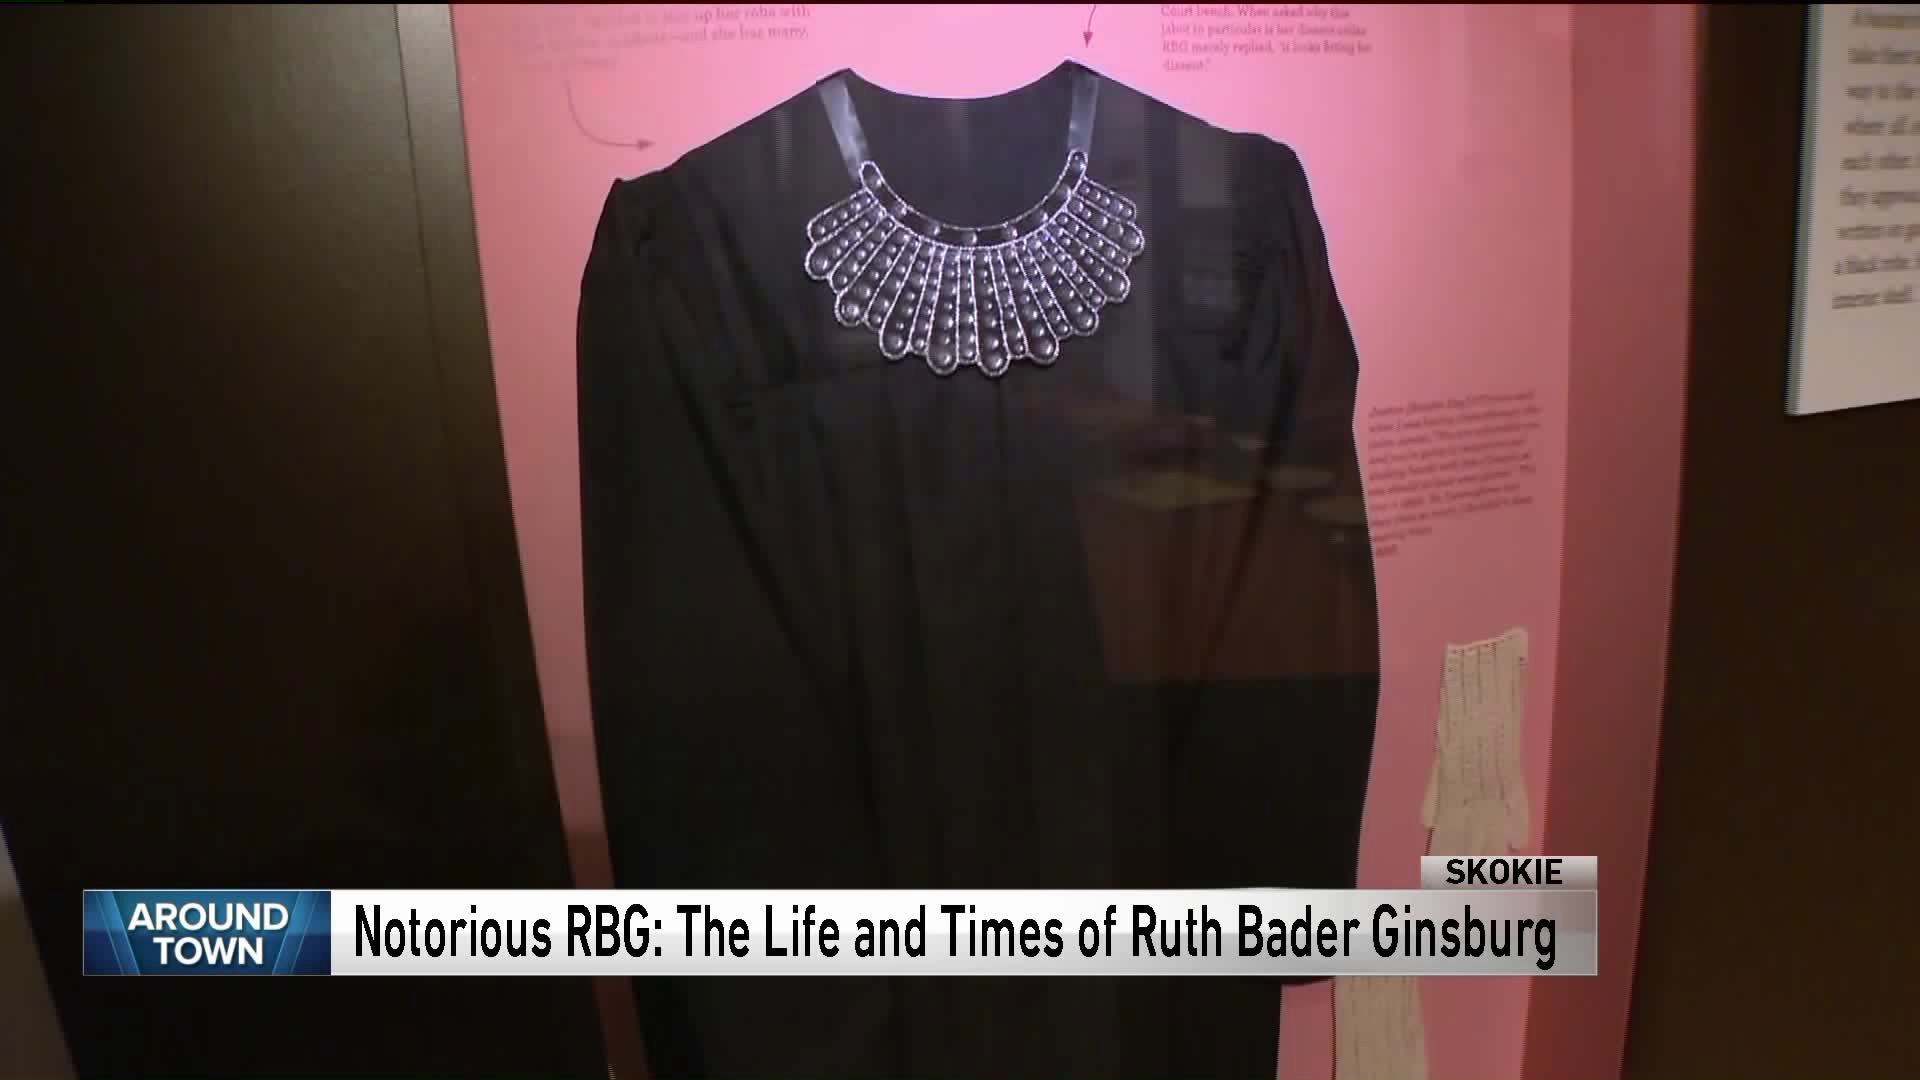 Around Town previews ‘Notorious RBG: The Life and Times of Ruth Bader Ginsburg’ exhibit